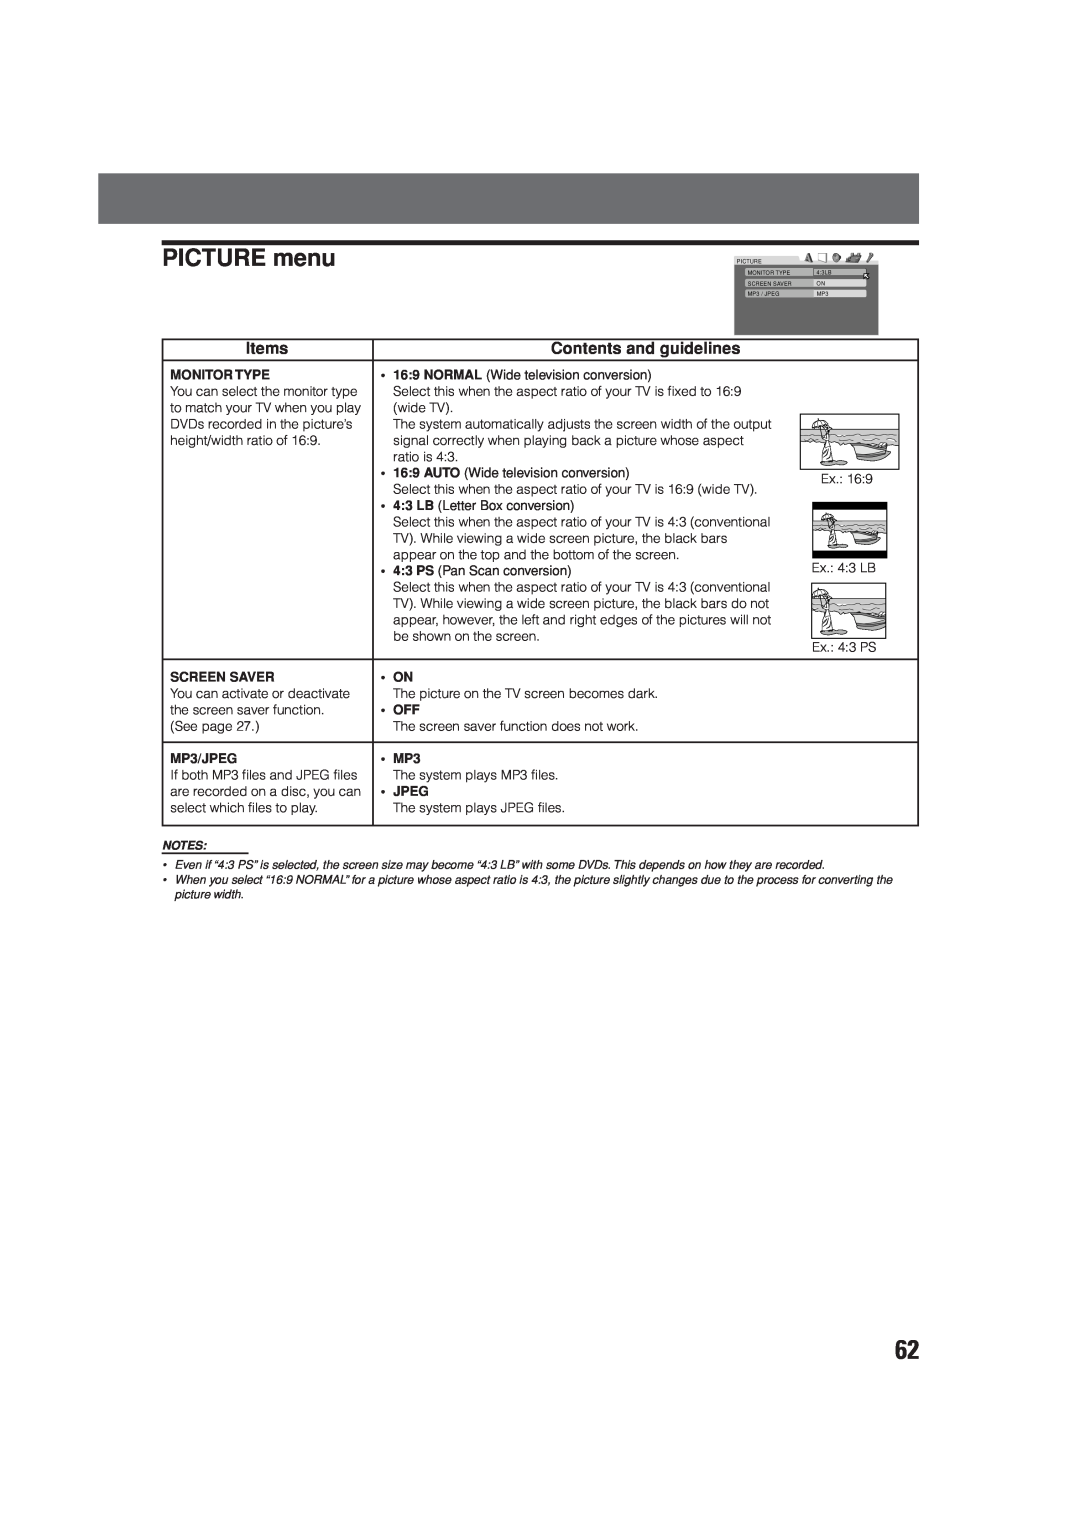 JVC LVT0865-004A, XV-THV70R, SP-XCV70 manual PICTURE menu, Items, Contents and guidelines 